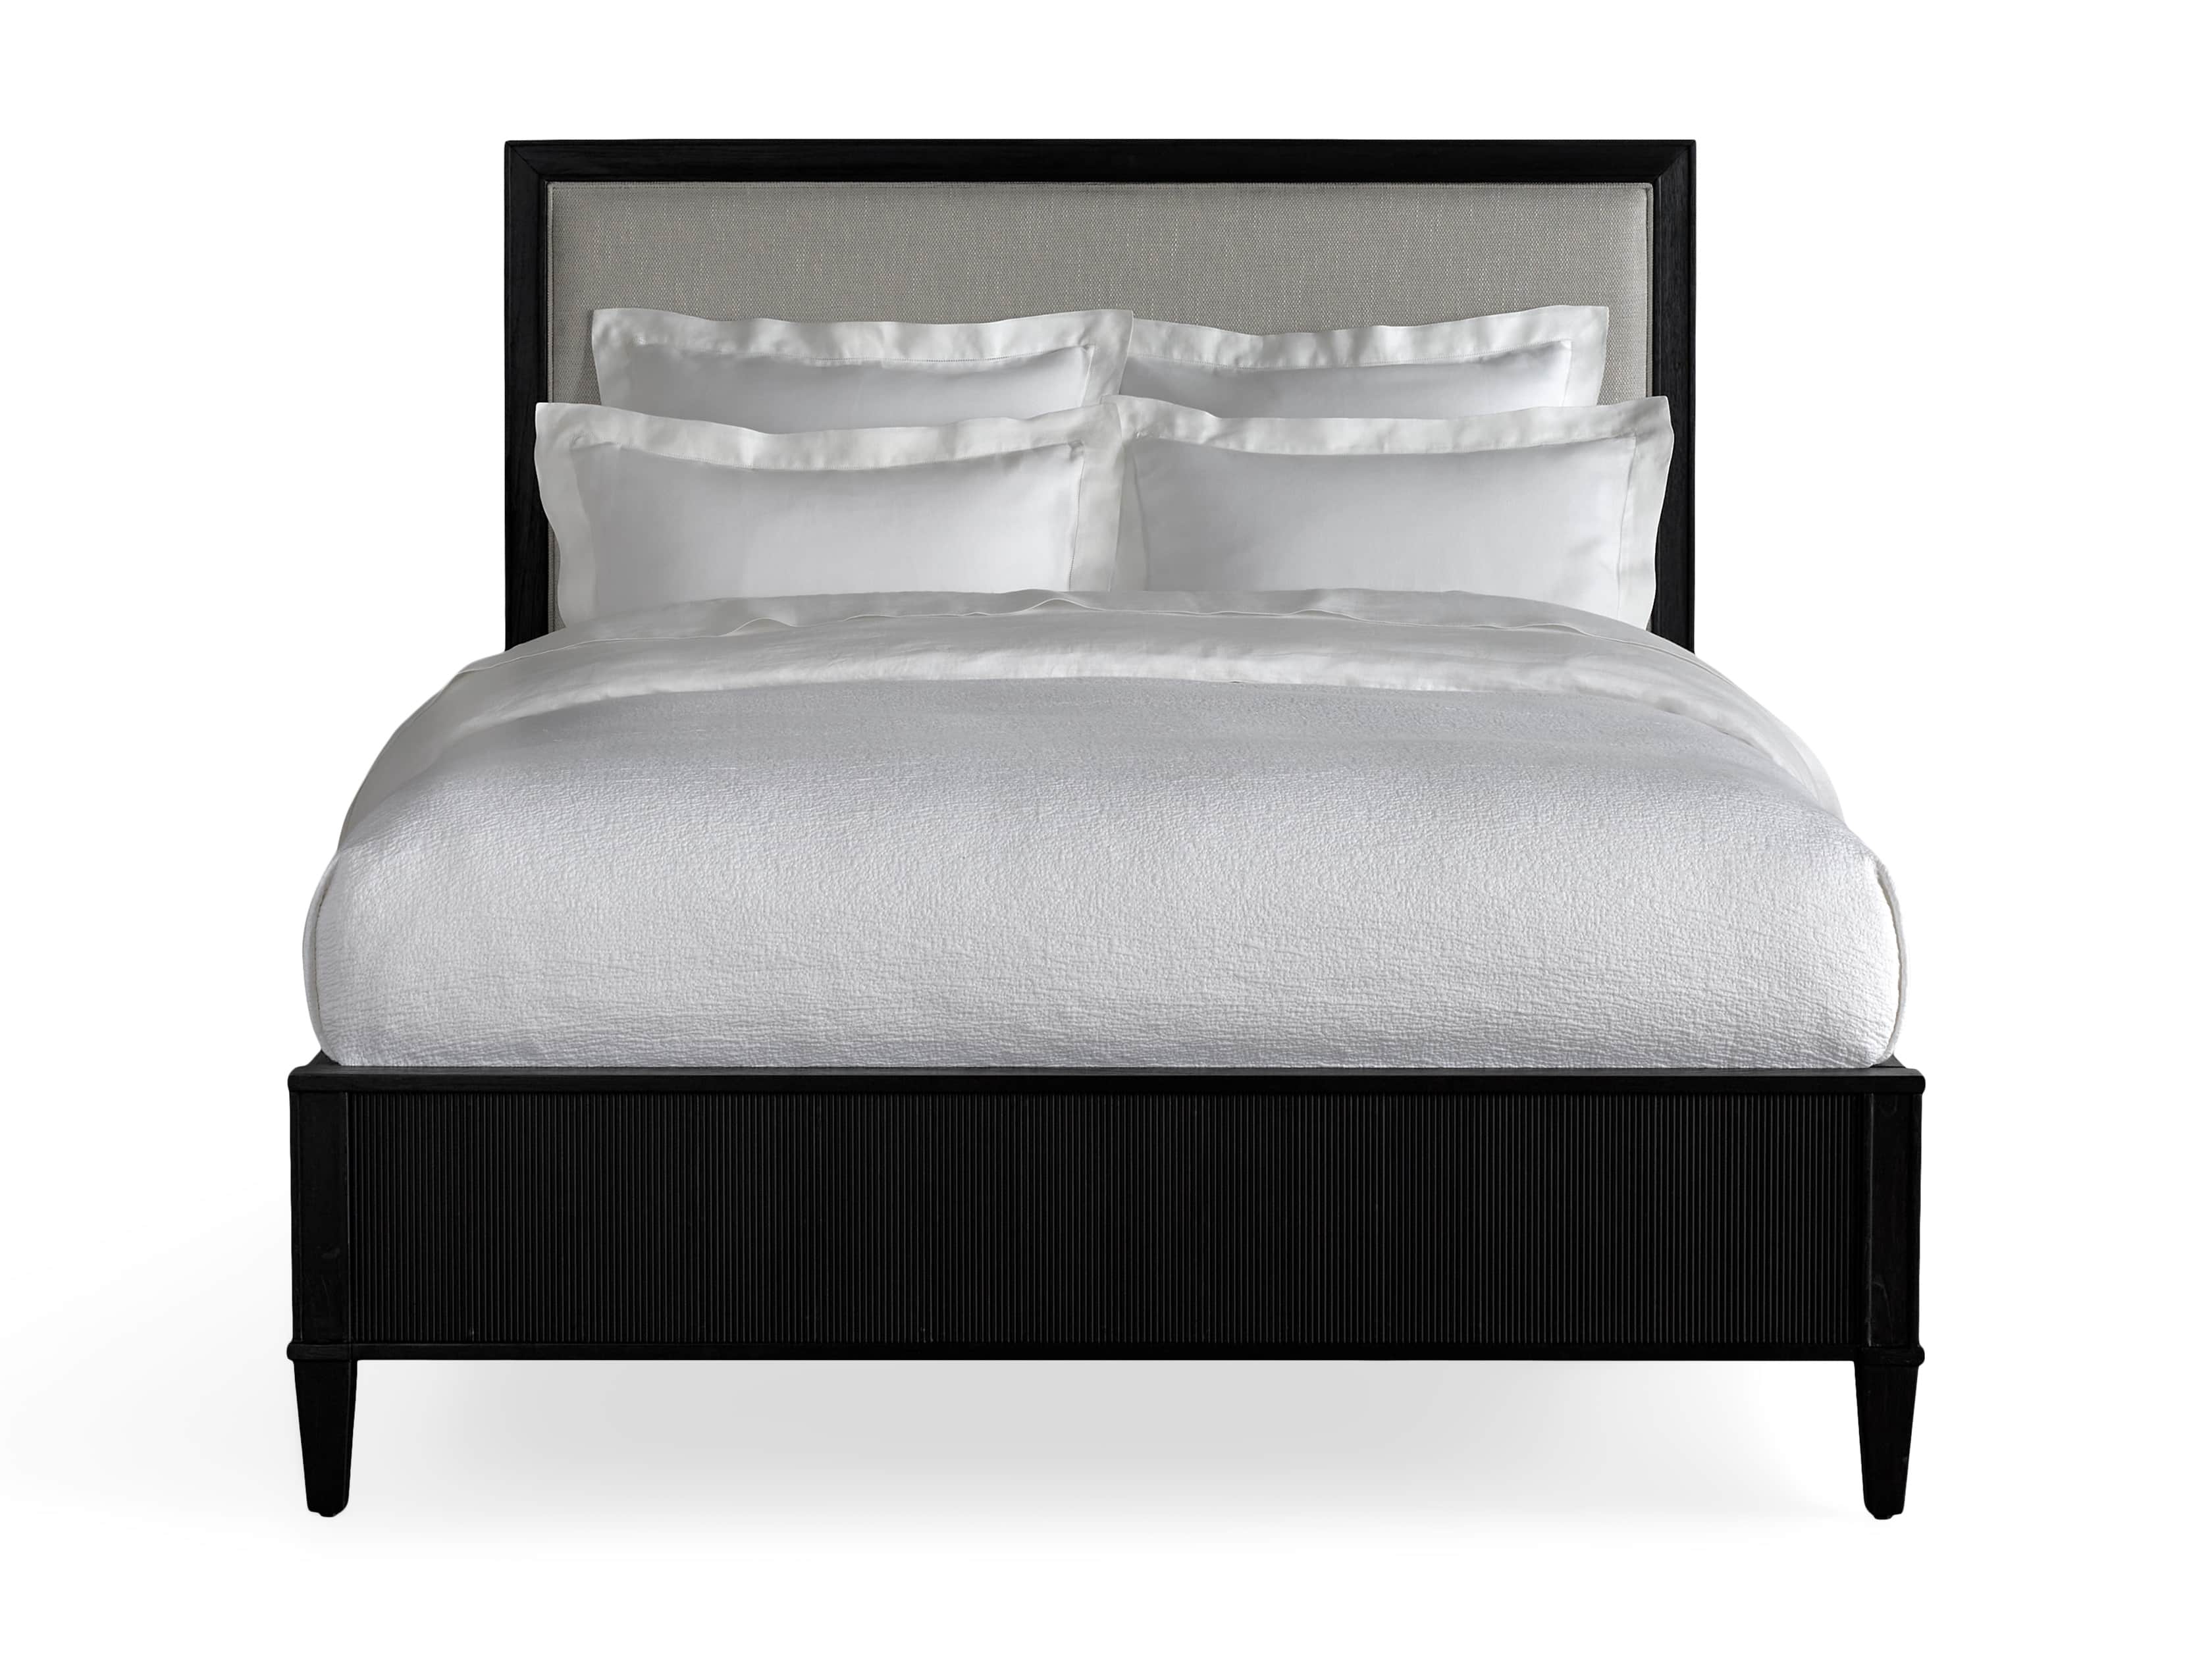 Pearson Gallery Cane Bed – Arhaus